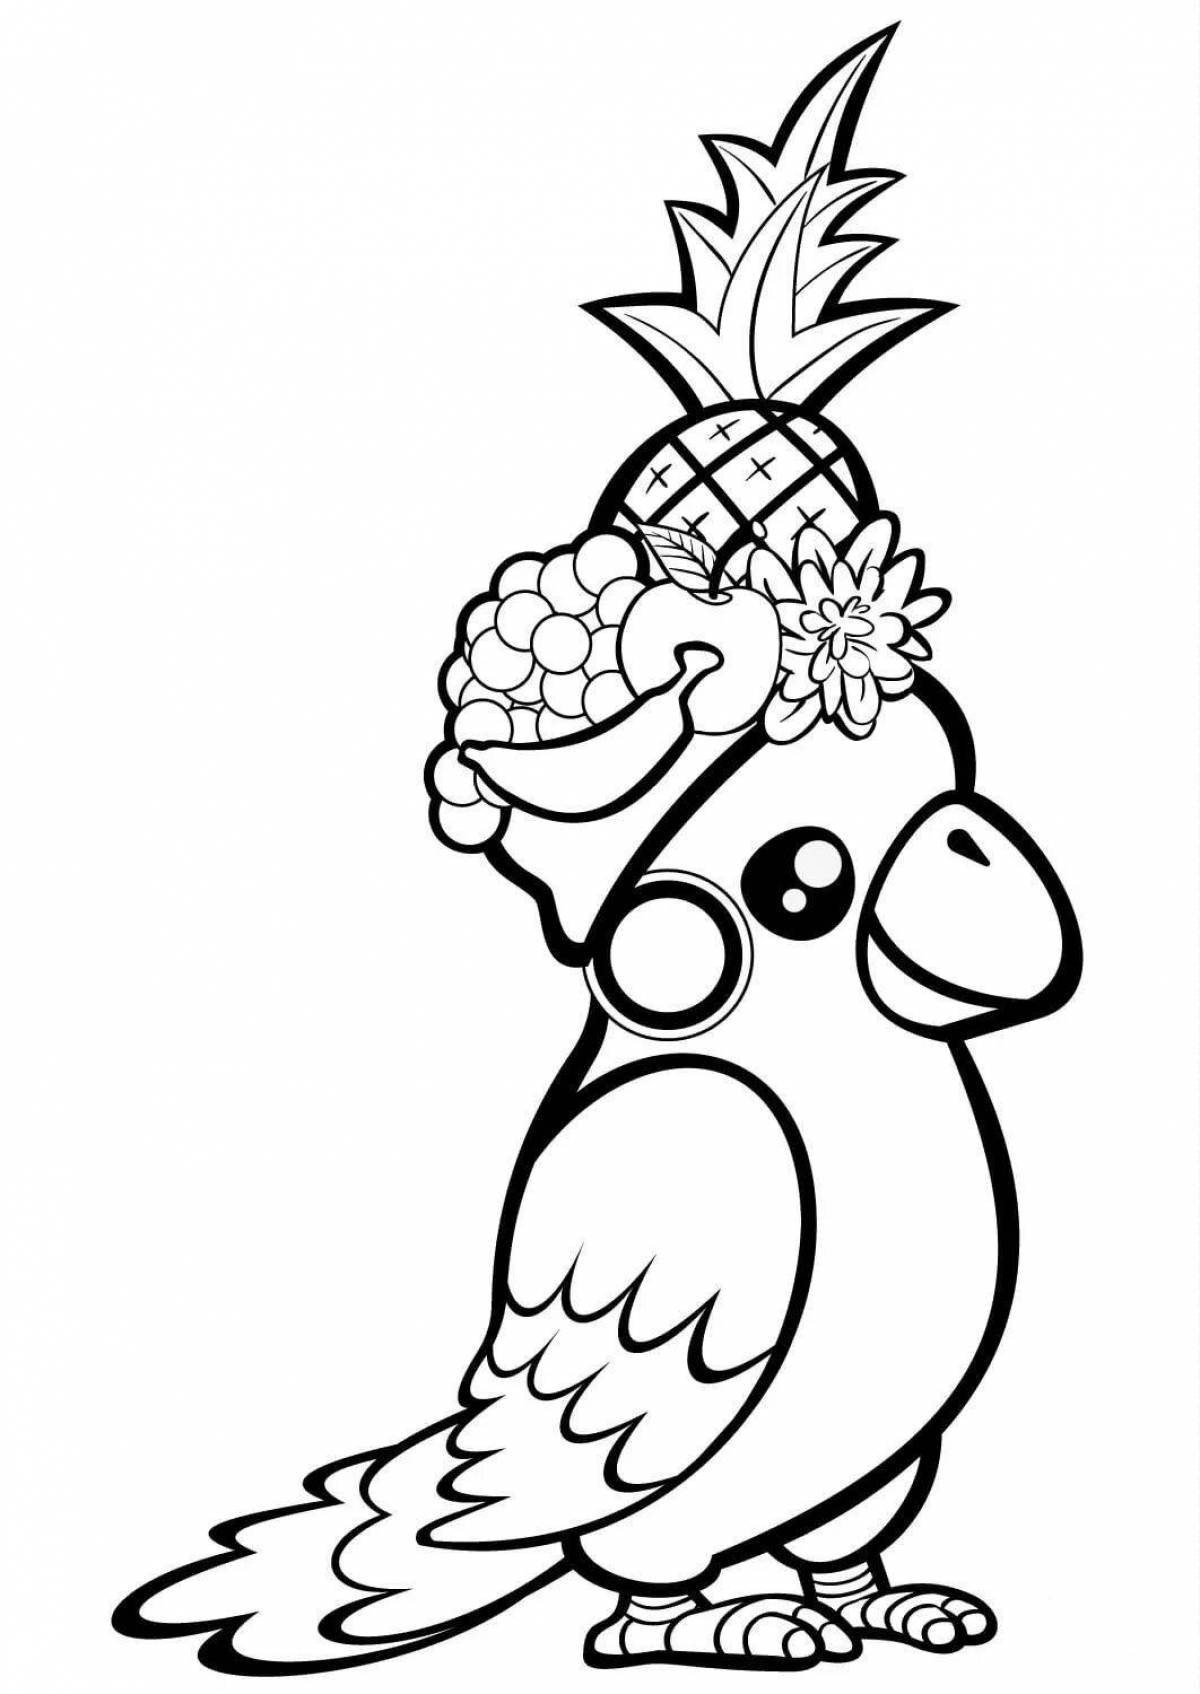 Coloring page gorgeous christmas bird